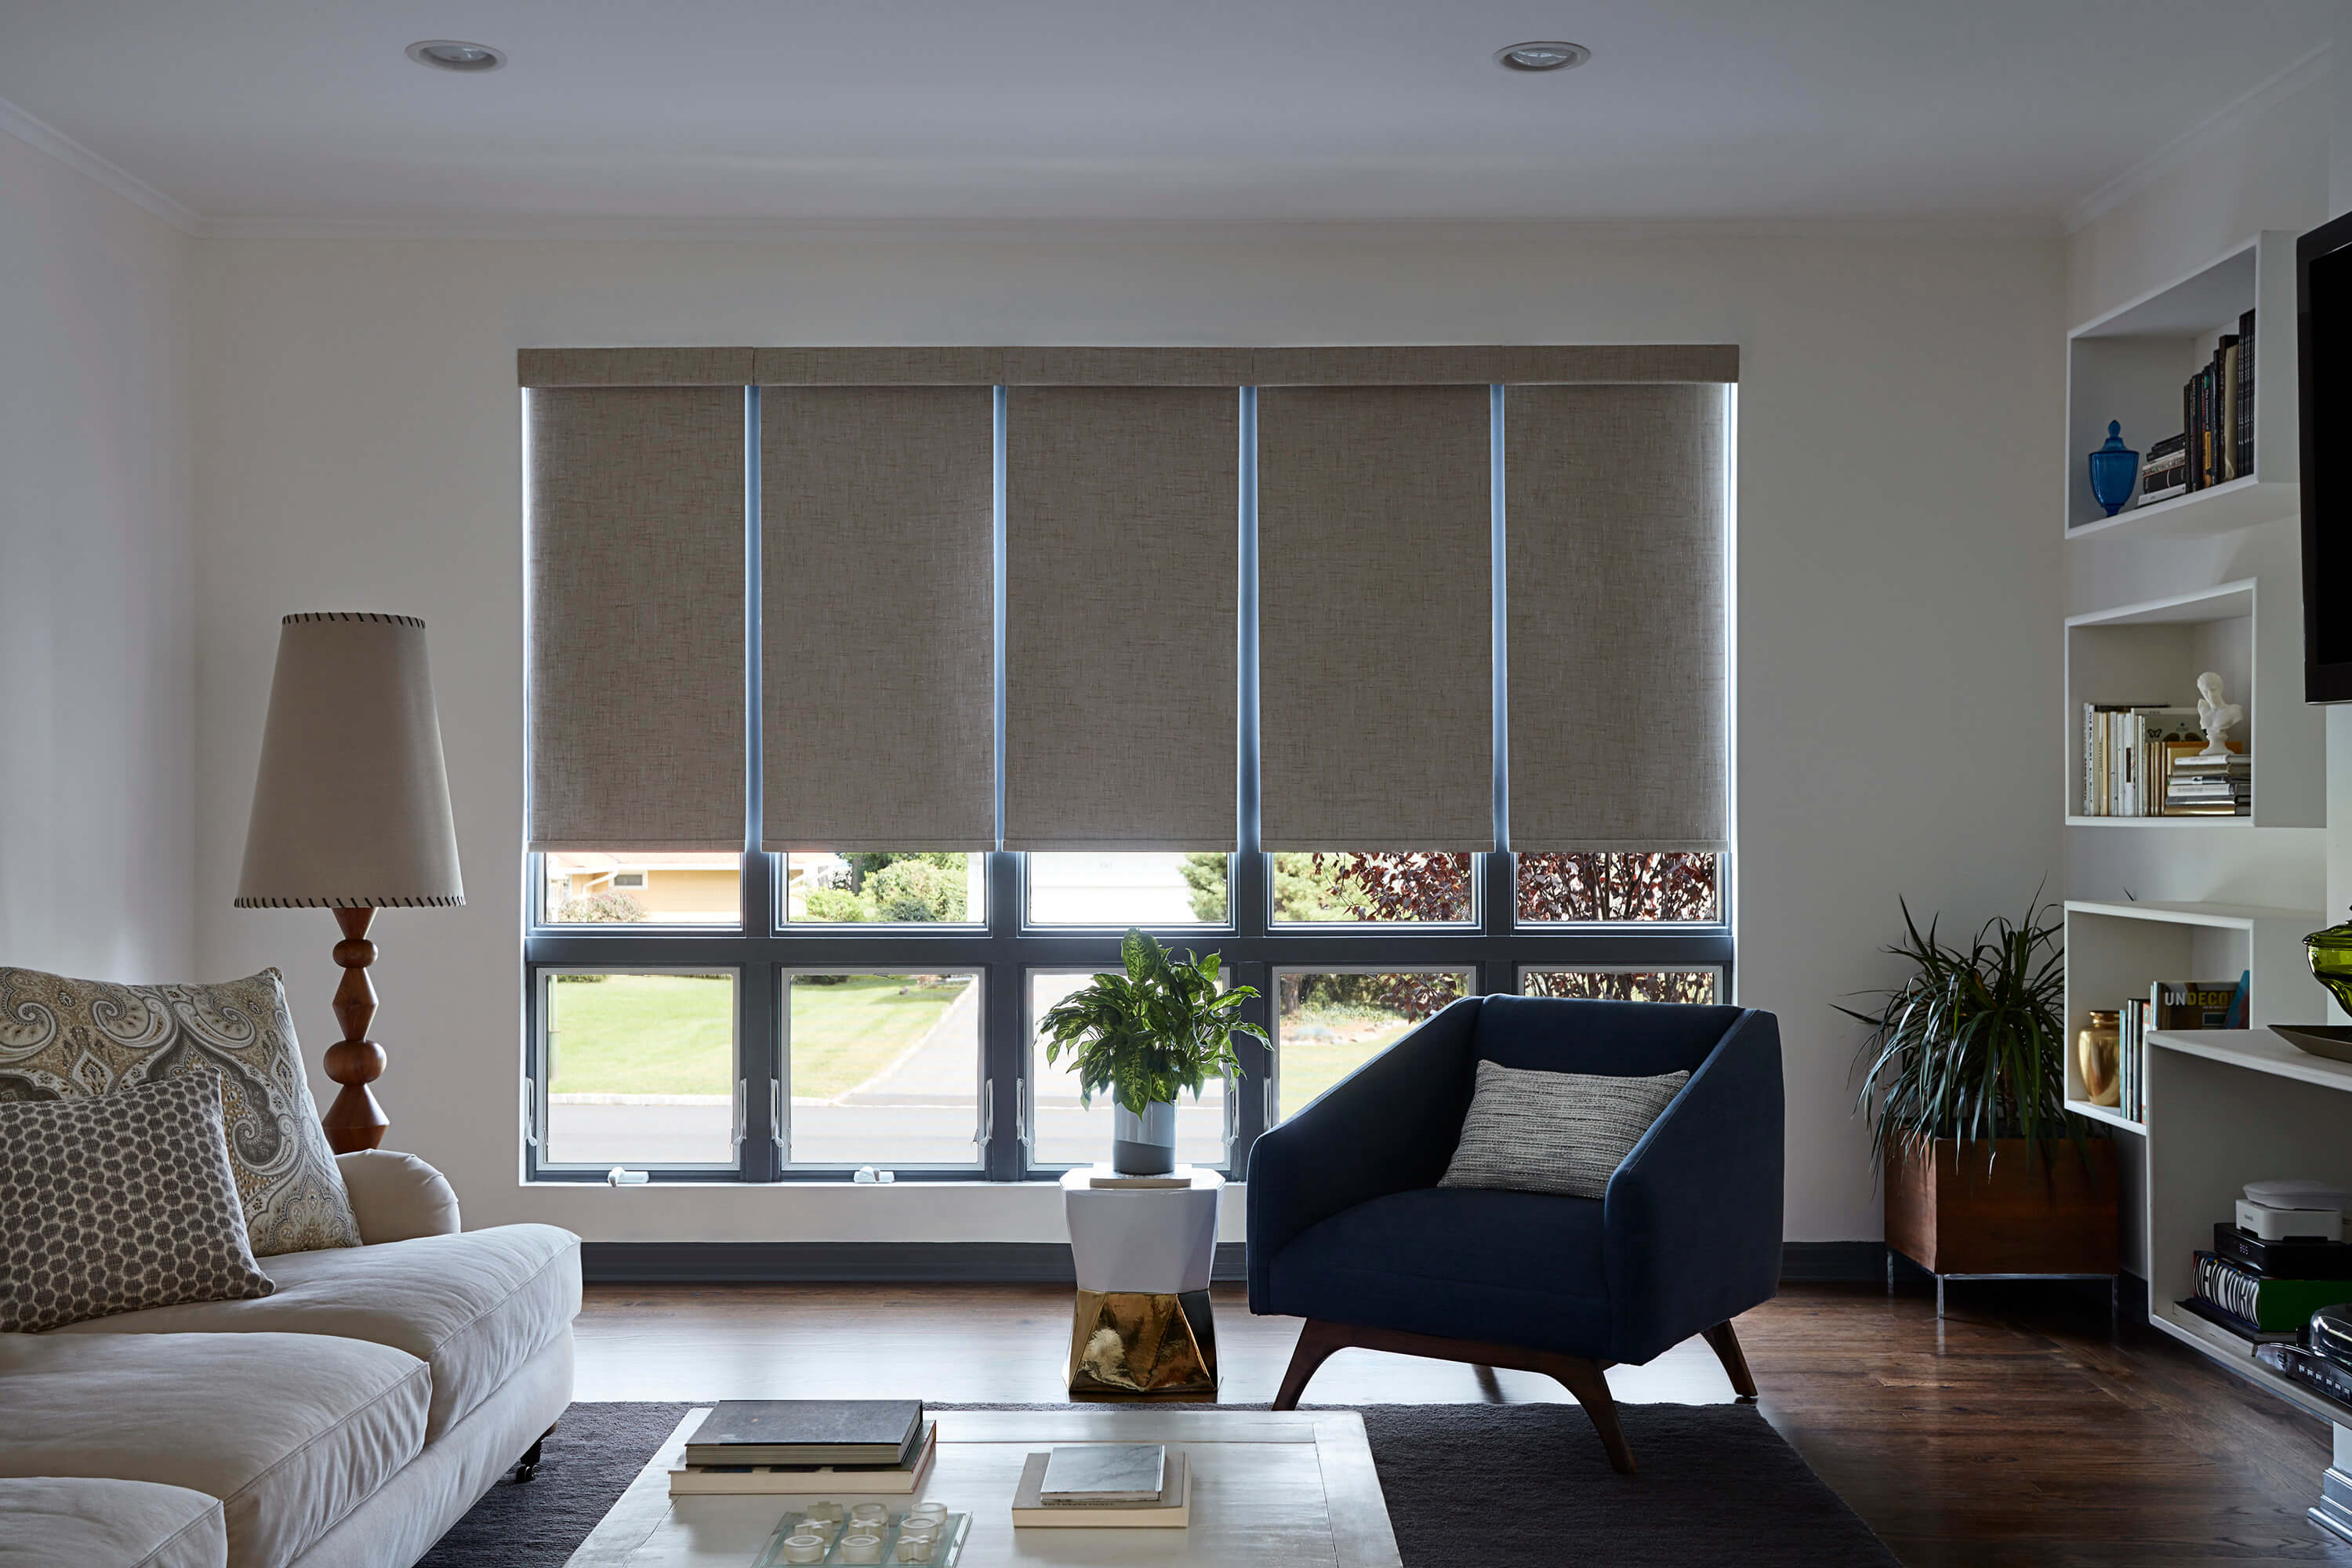 Blackout roller shades, complete darkness and comfort